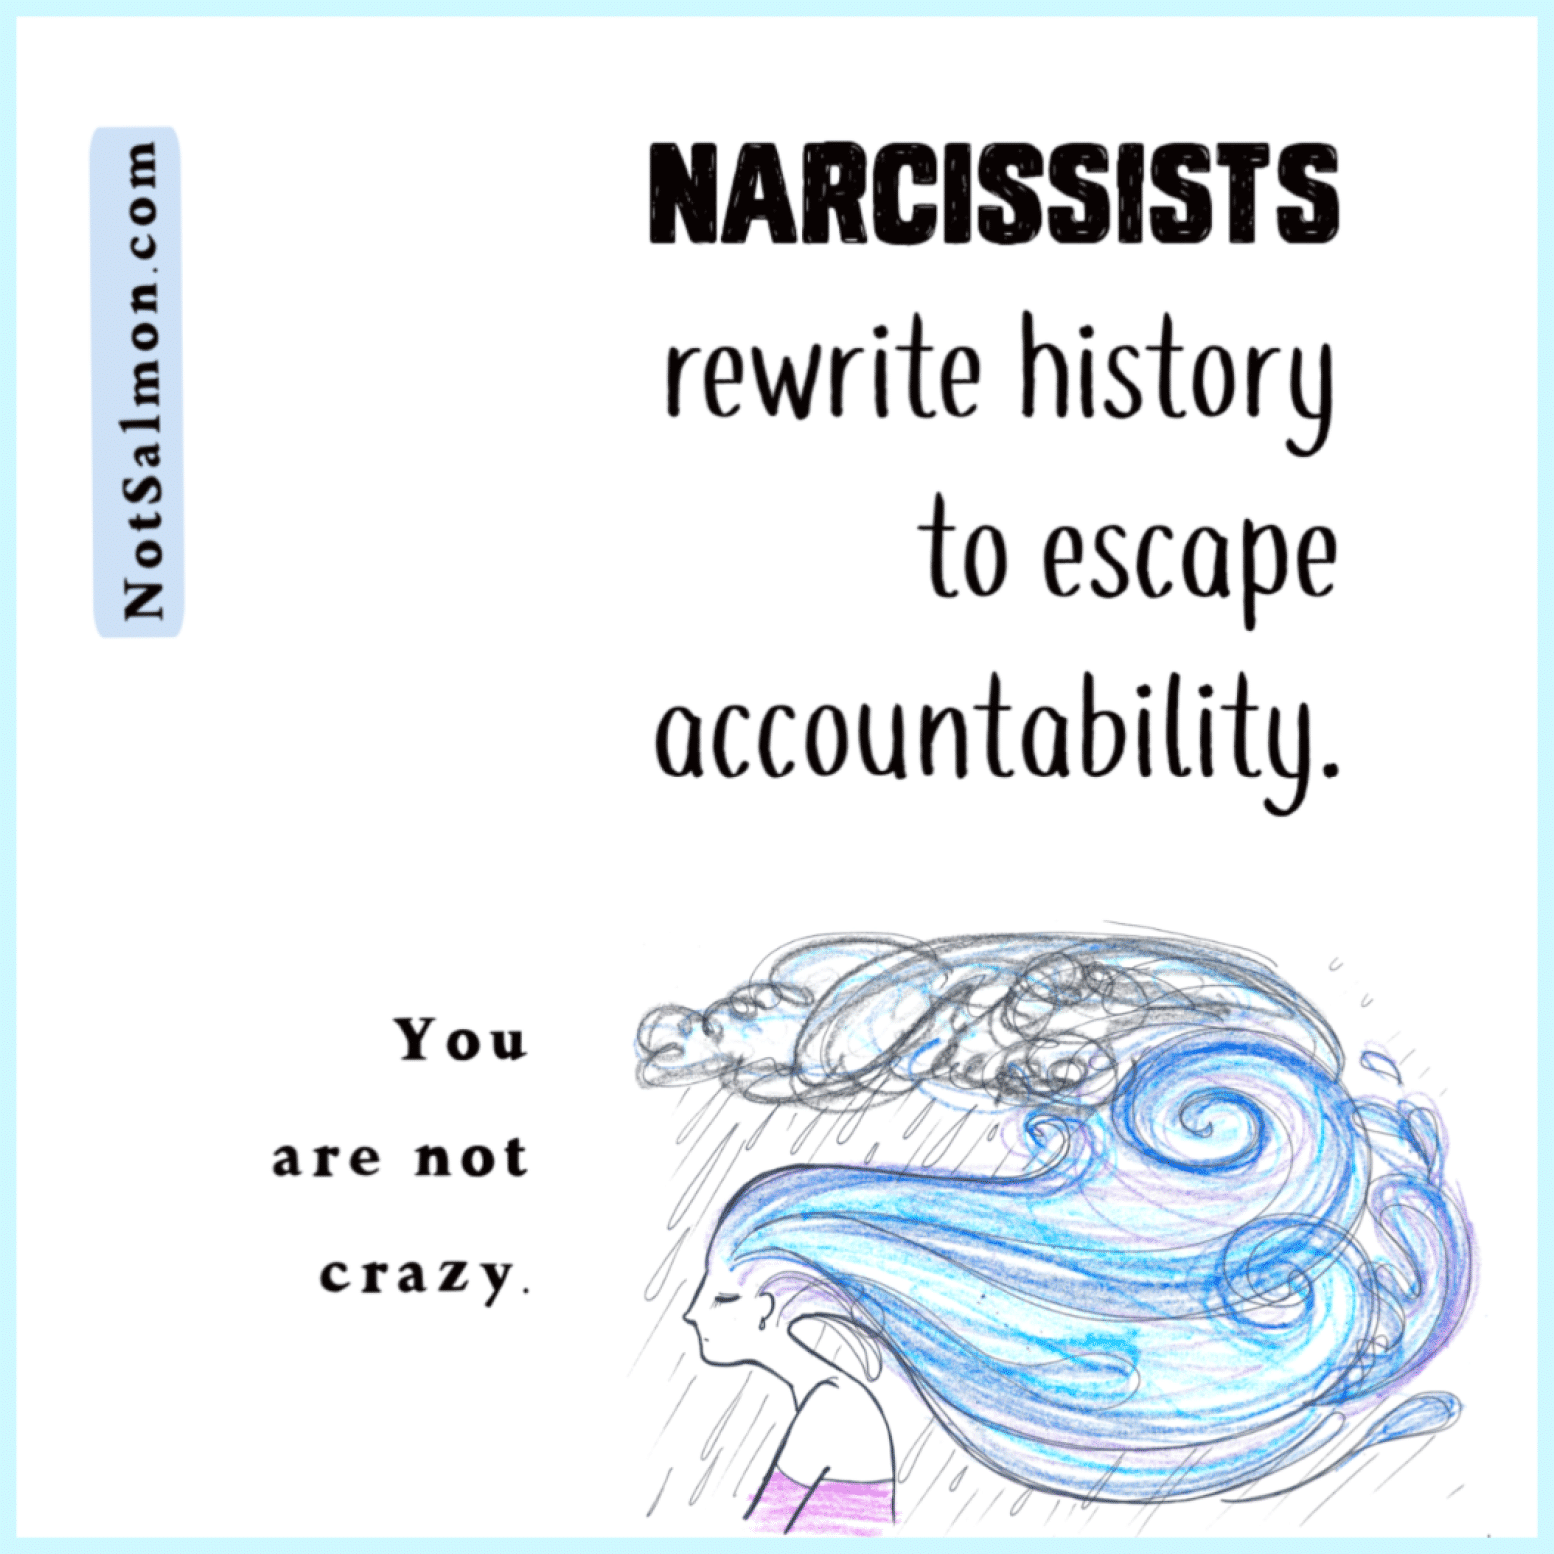 narcissist quote toxic people